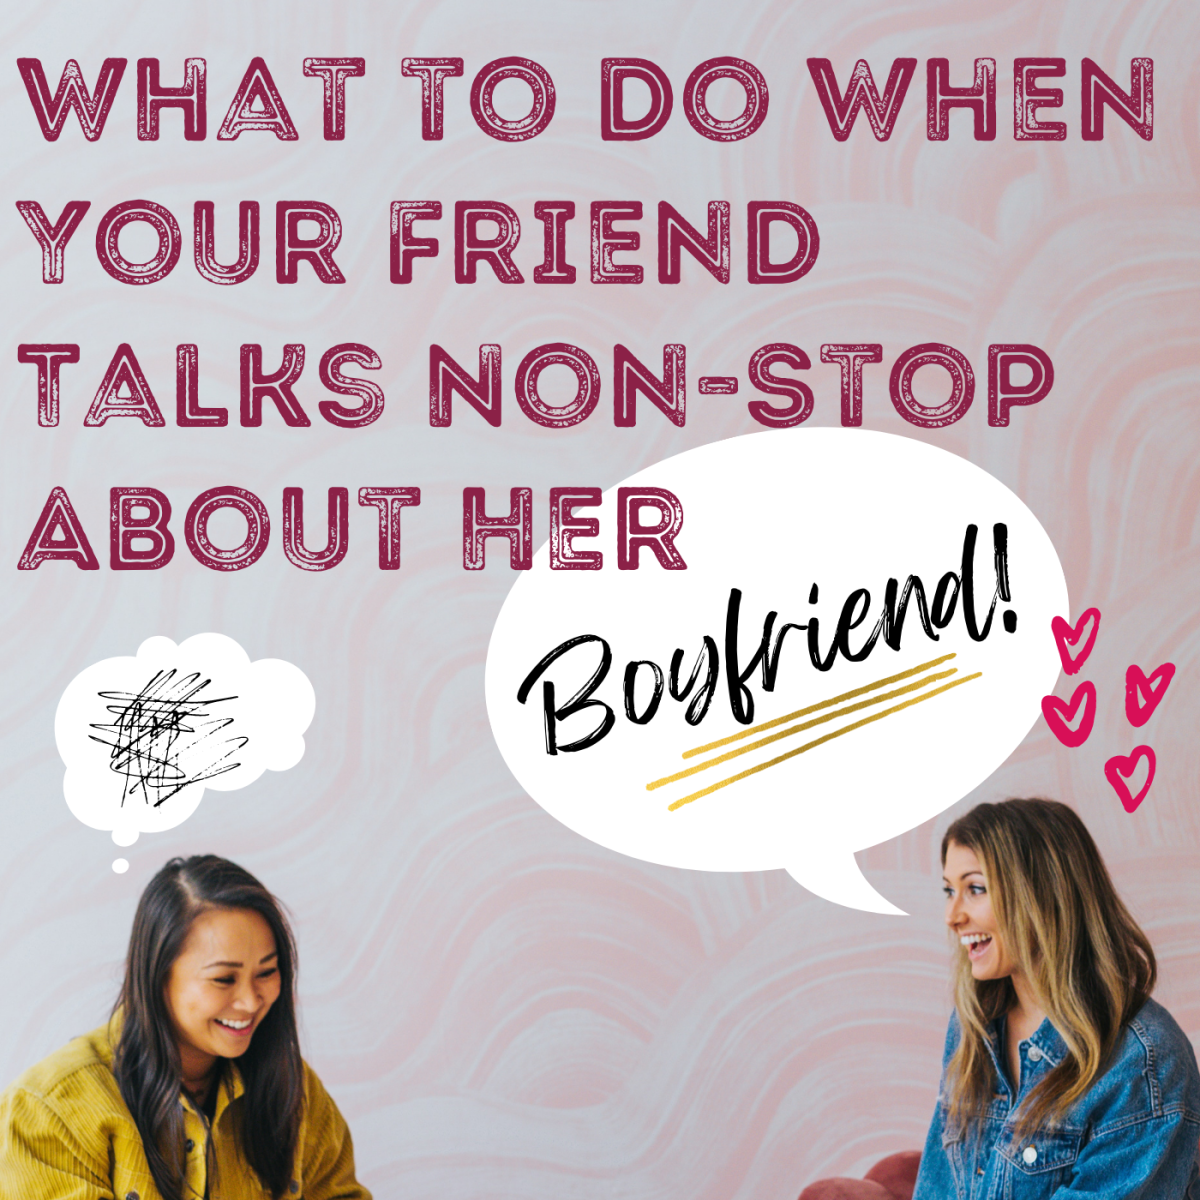 Dealing With a Friend Who Won't Stop Talking About Her Boyfriend